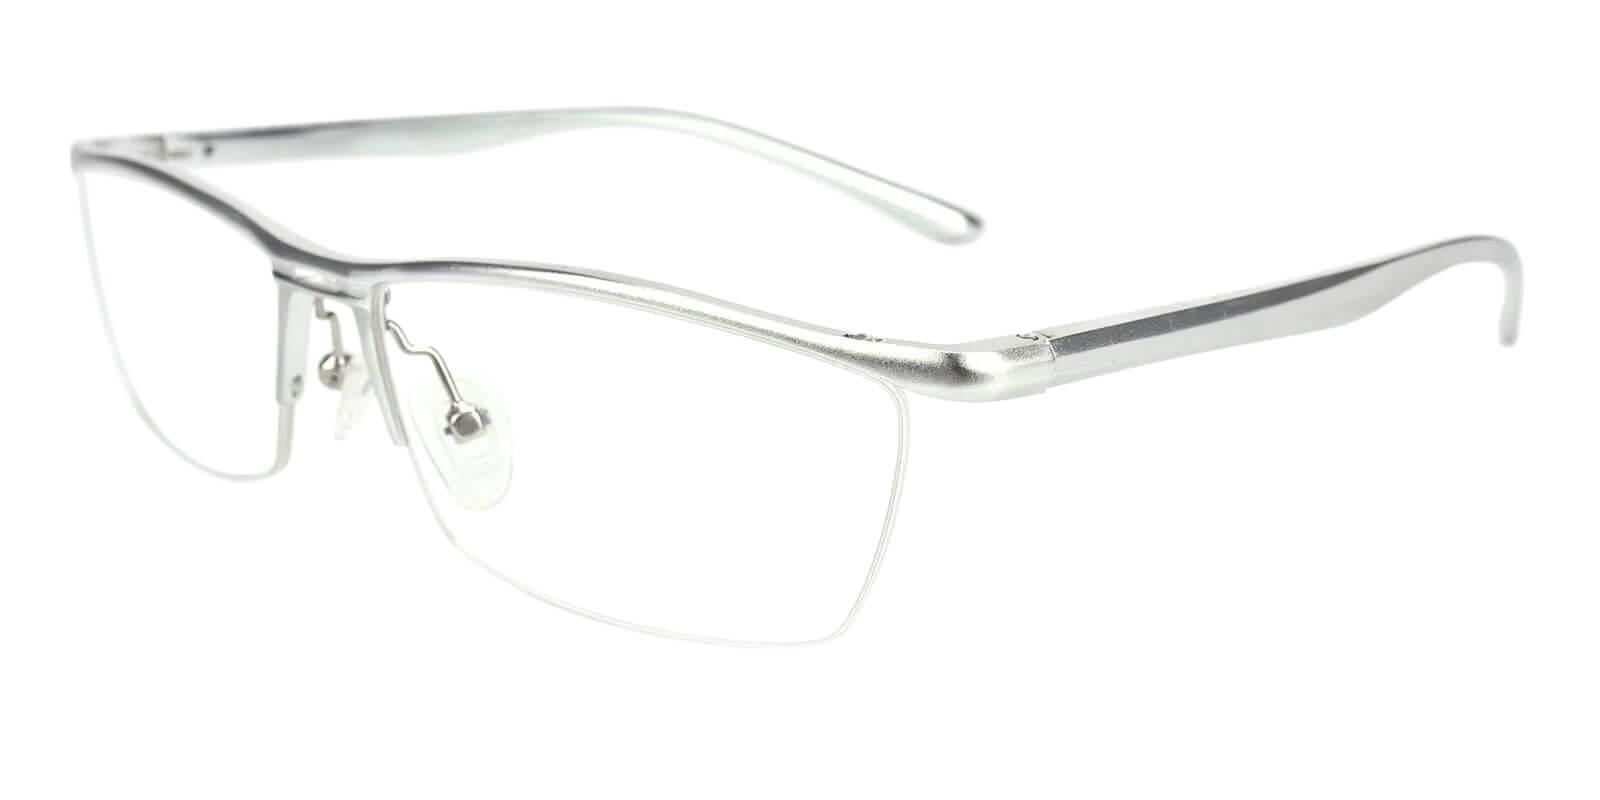 Record Silver Metal NosePads , SportsGlasses Frames from ABBE Glasses